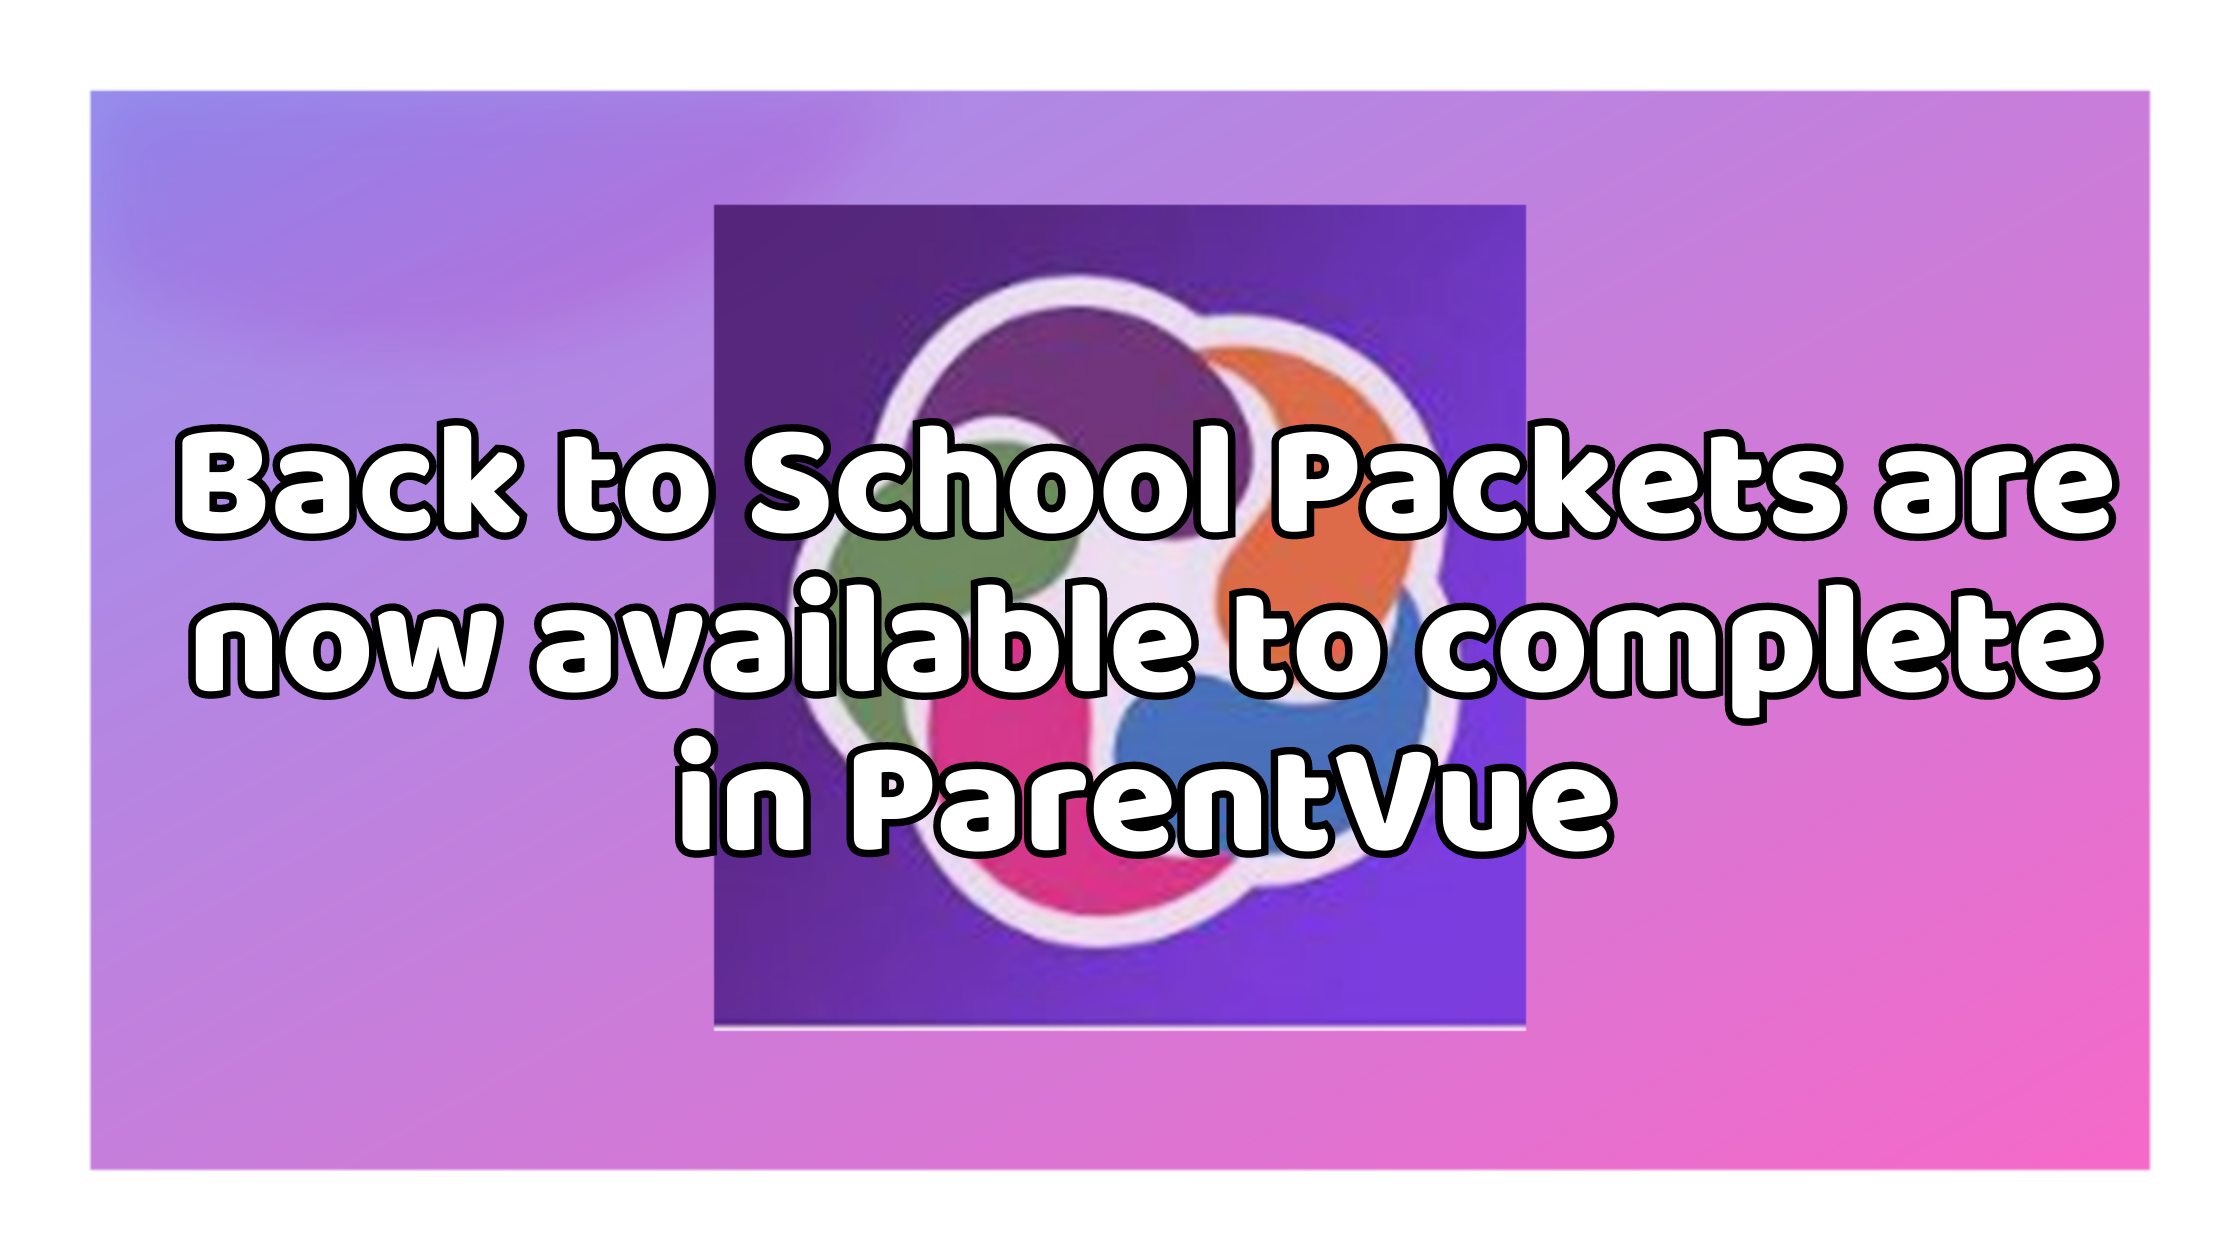 Back to School Packets now available in ParentVue